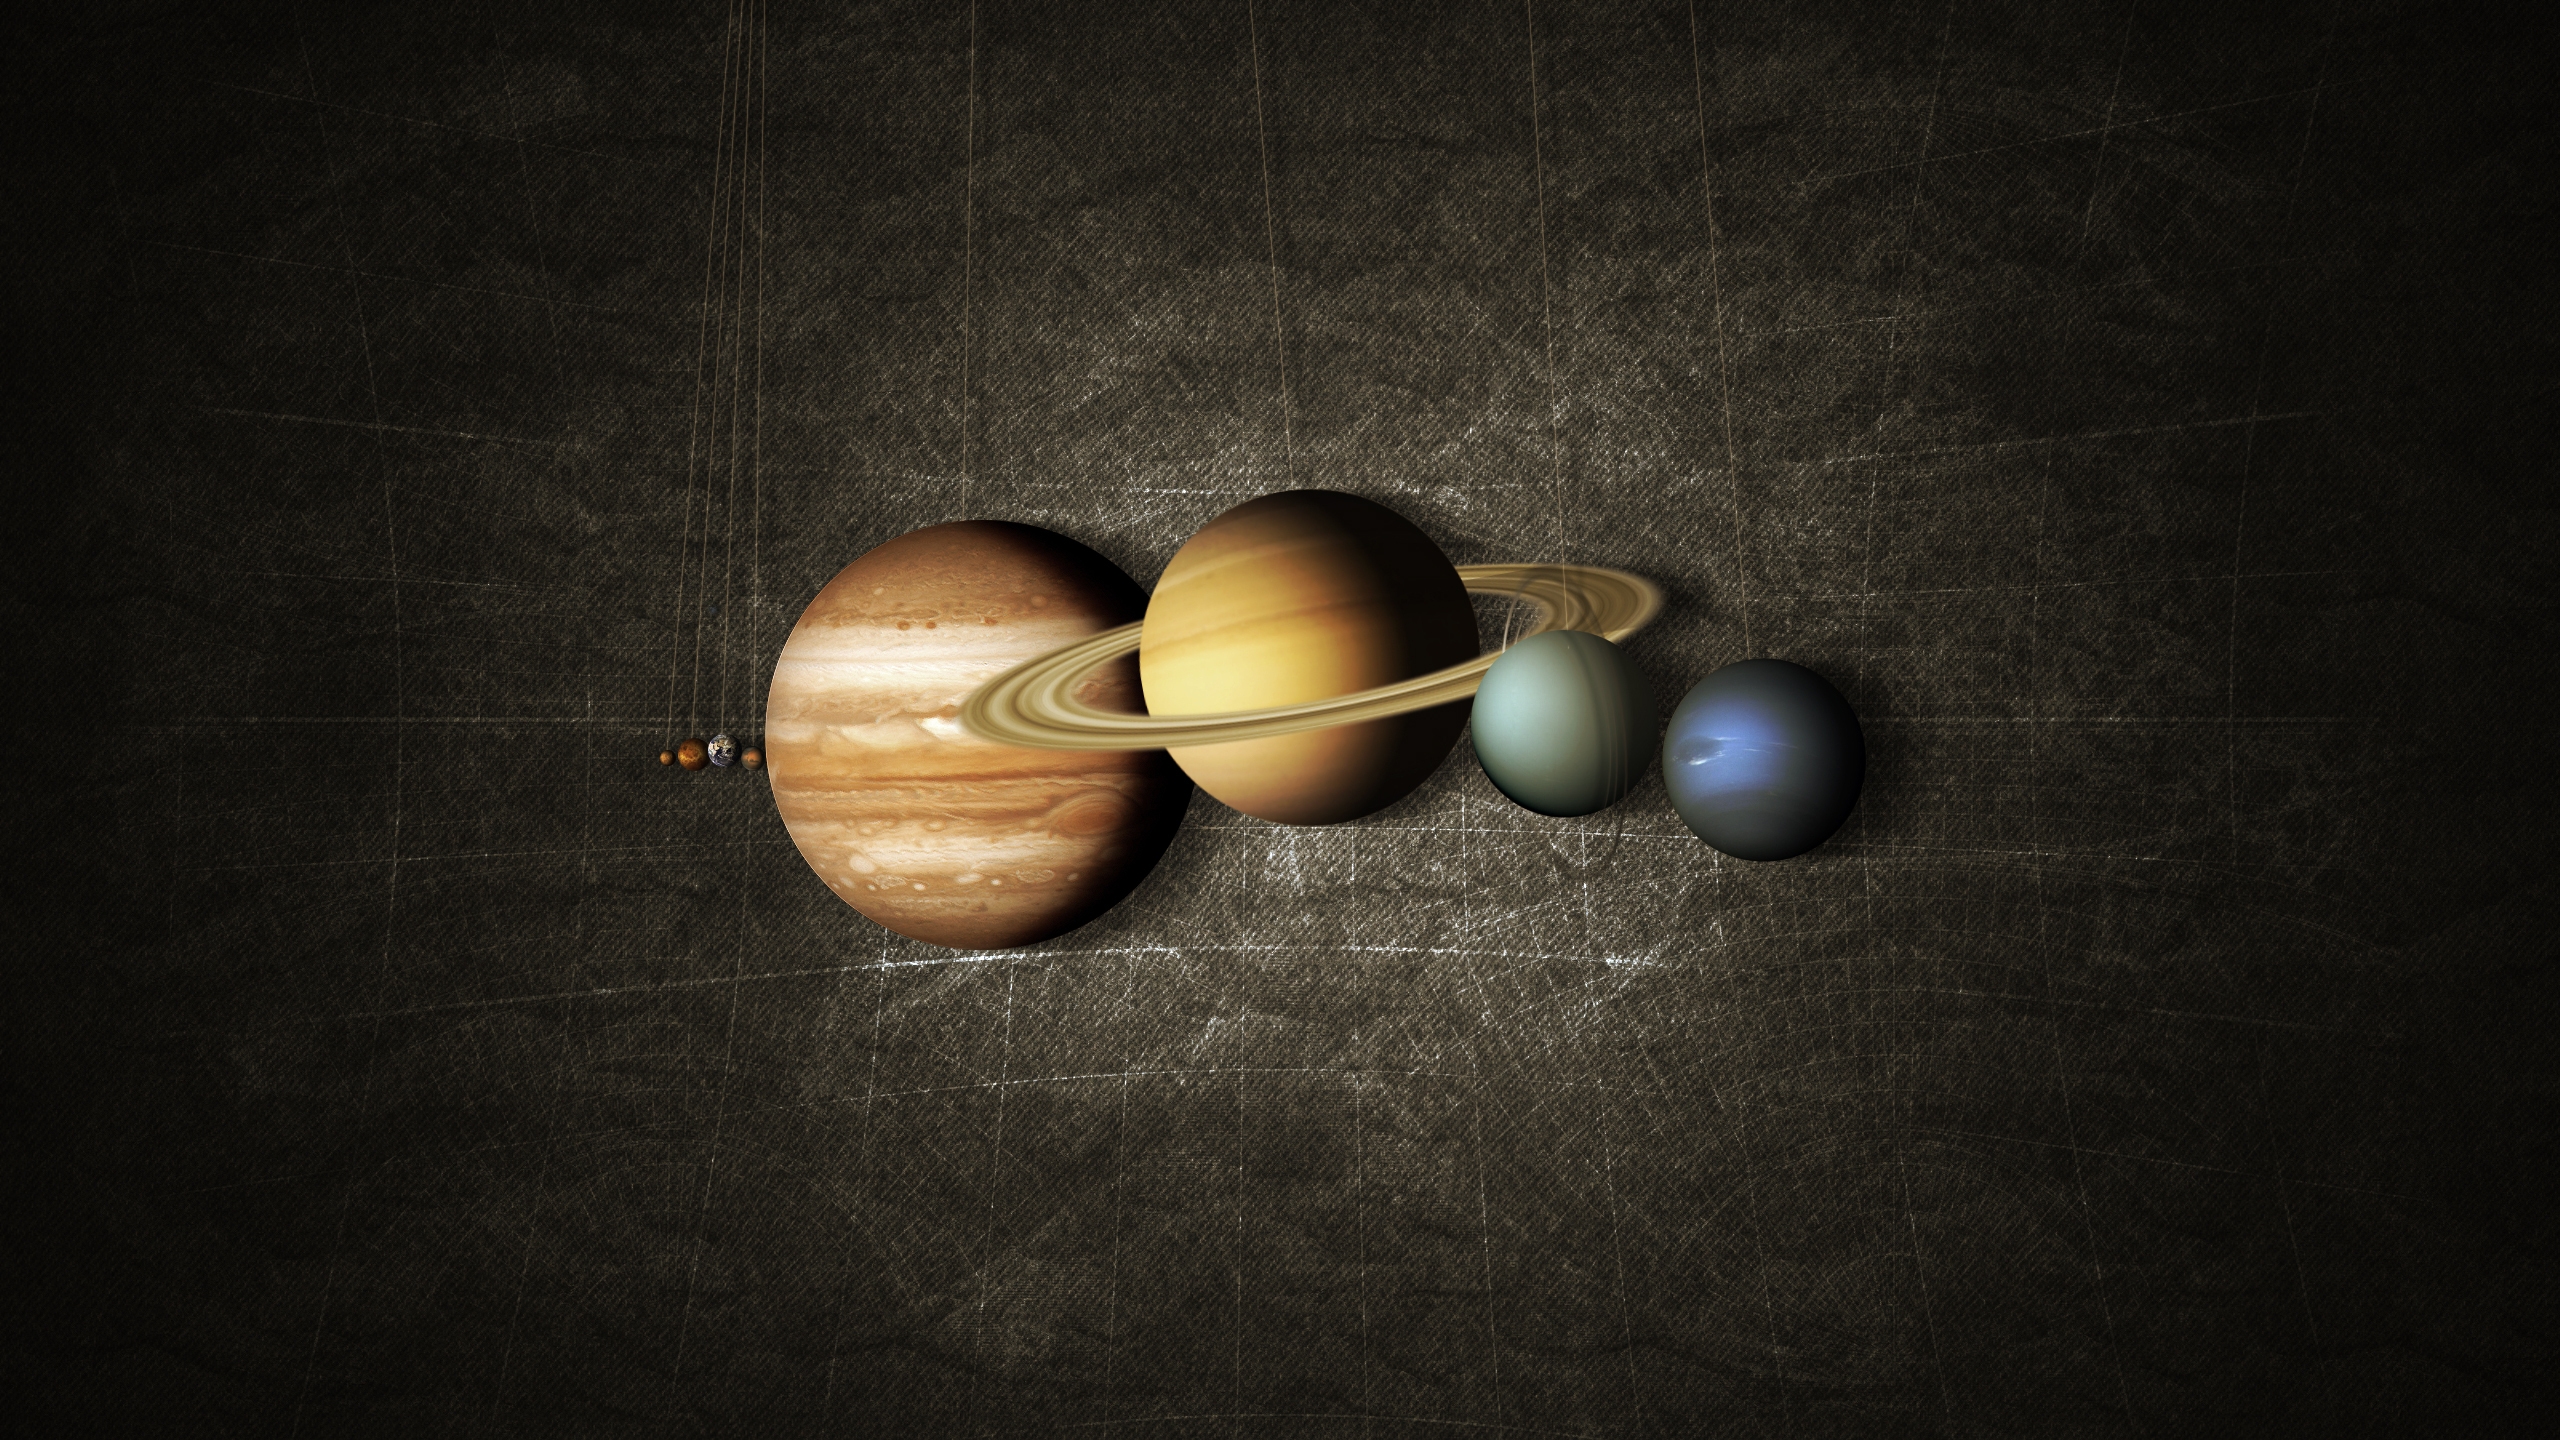 Planets Aligned for 2560x1440 HDTV resolution